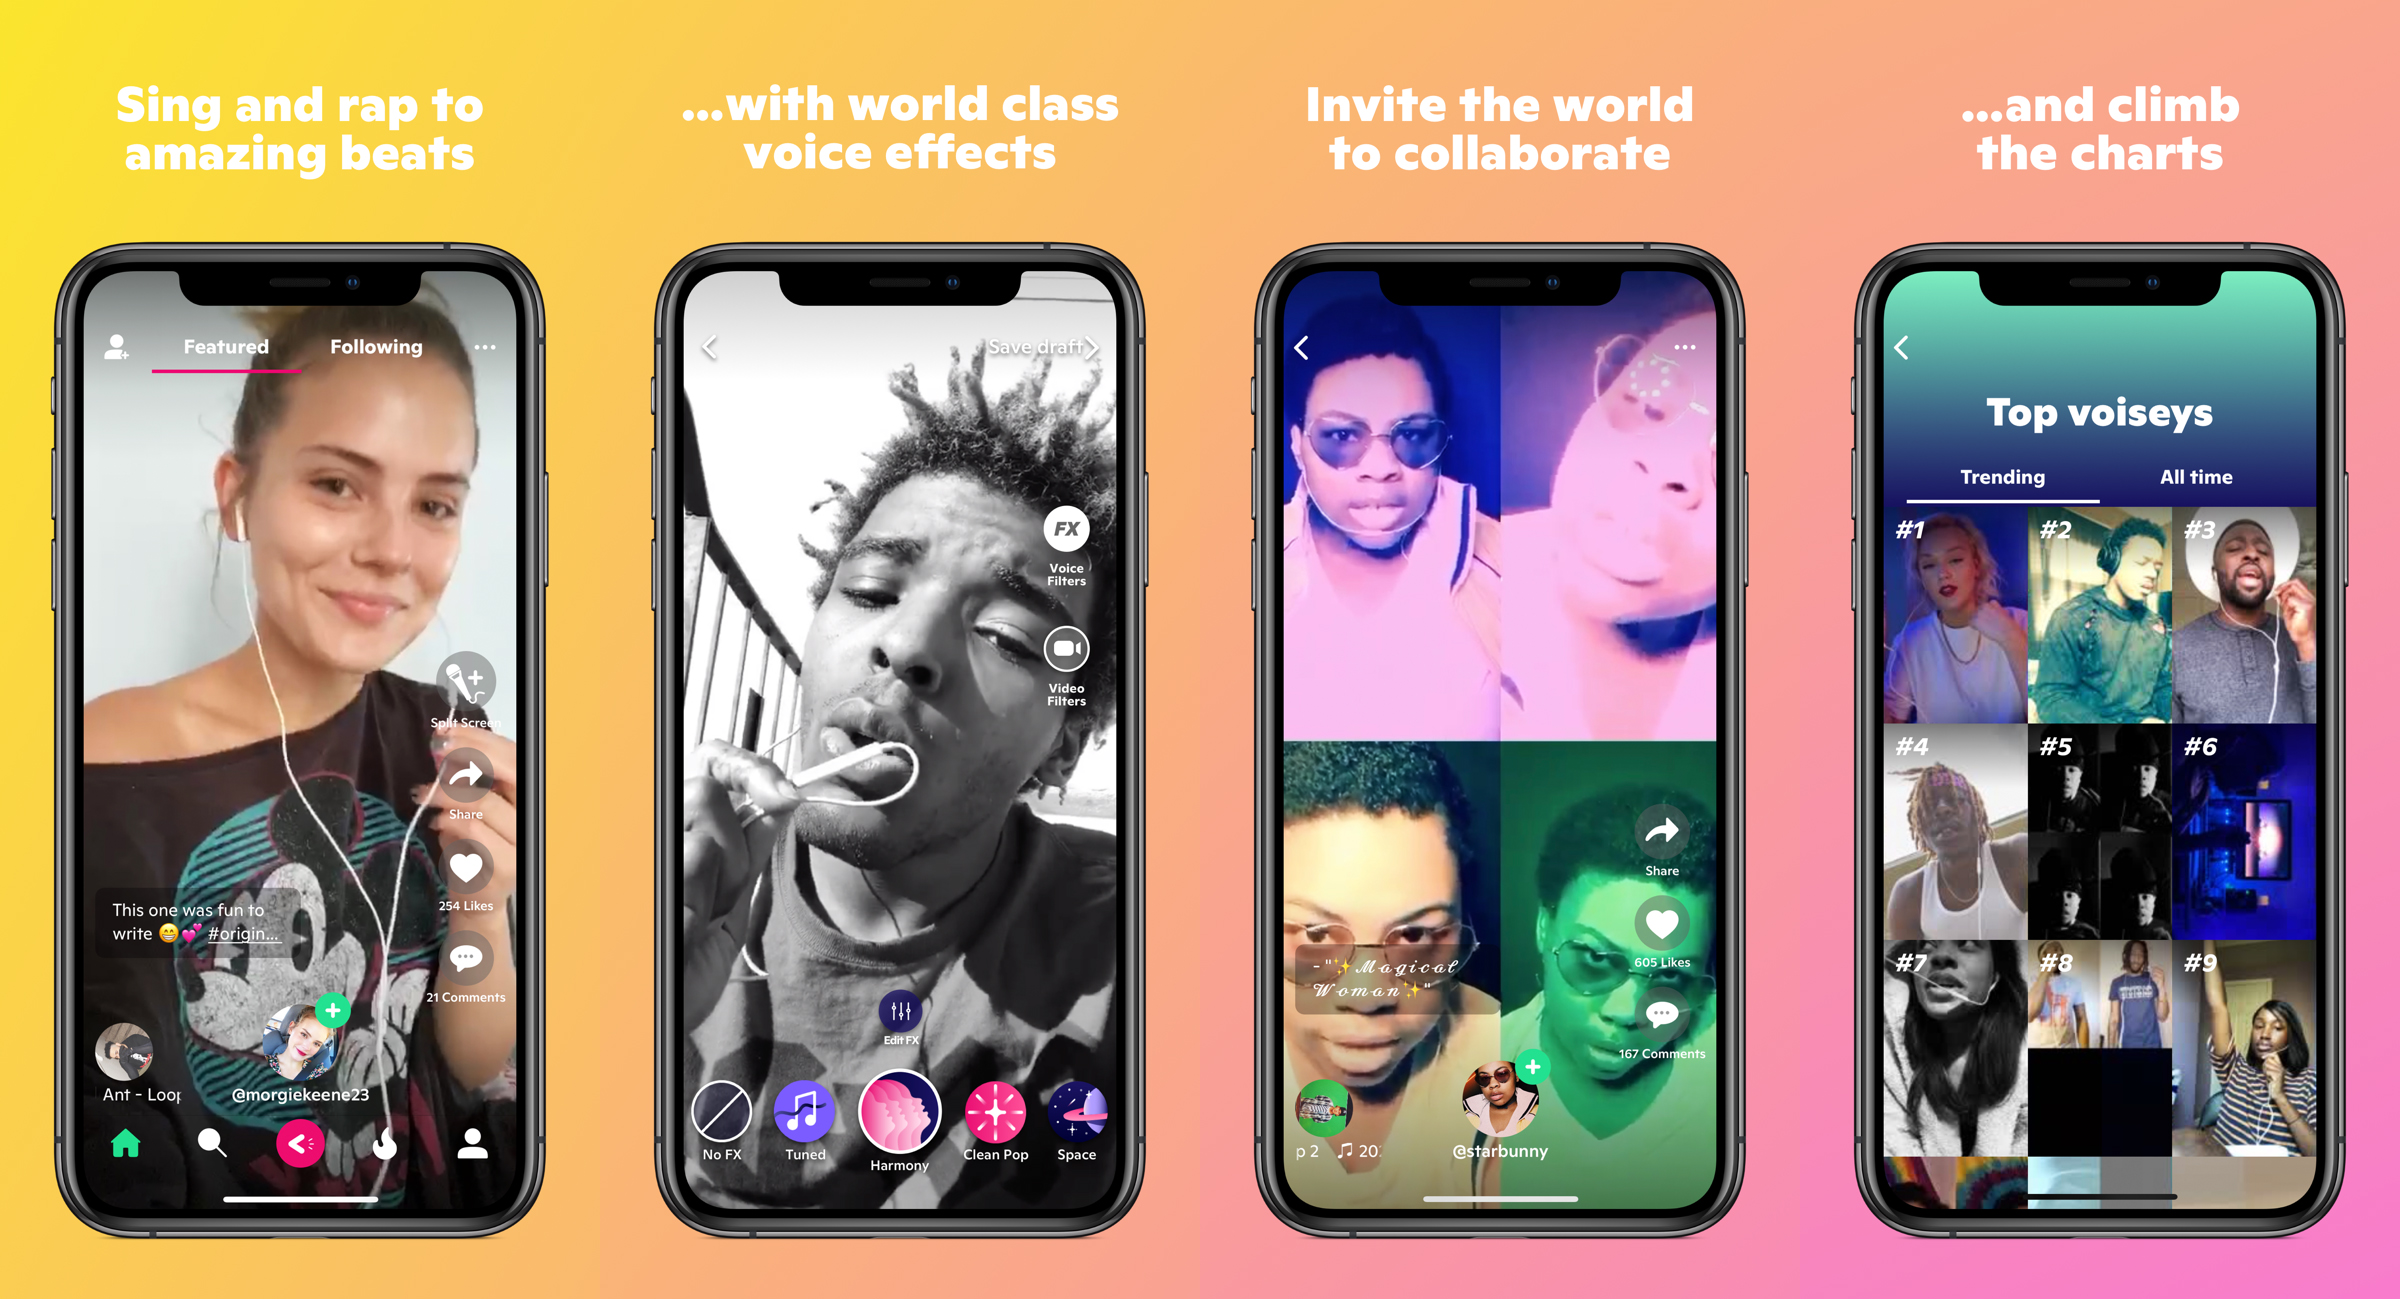 Snapchat acquires social music creation and short-video sharing app Voisey